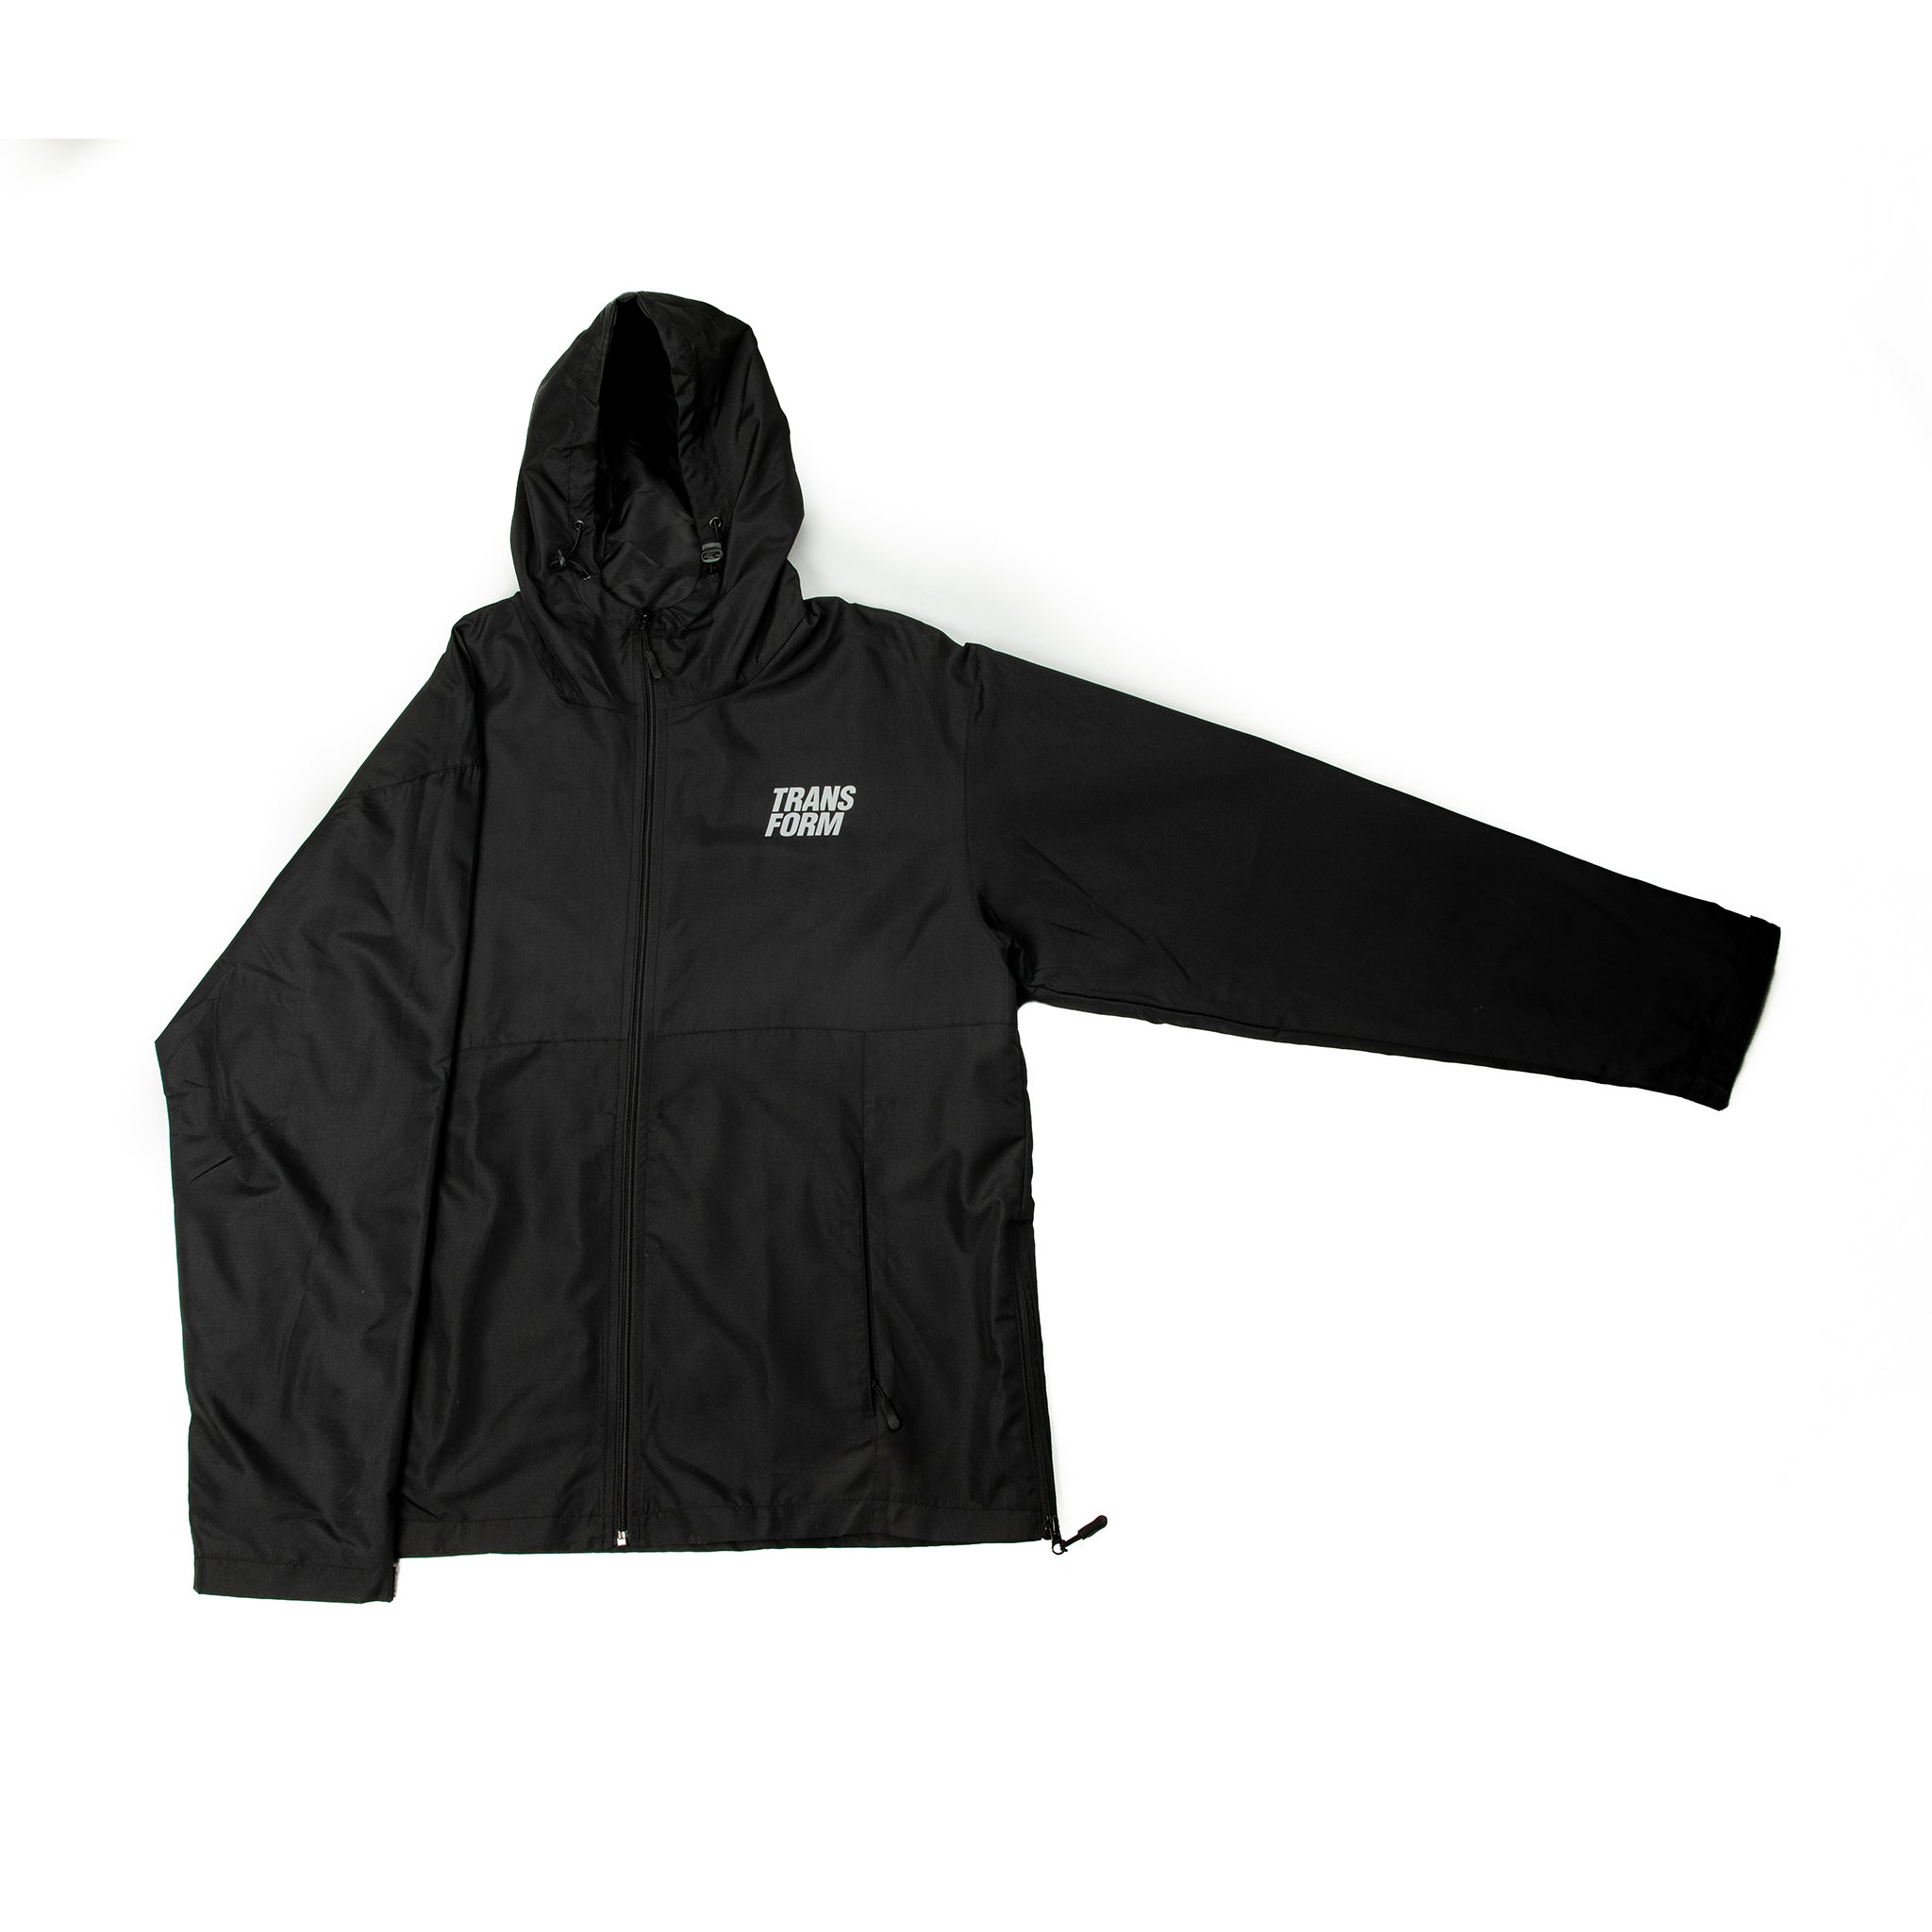 The Stacked Jacket Black